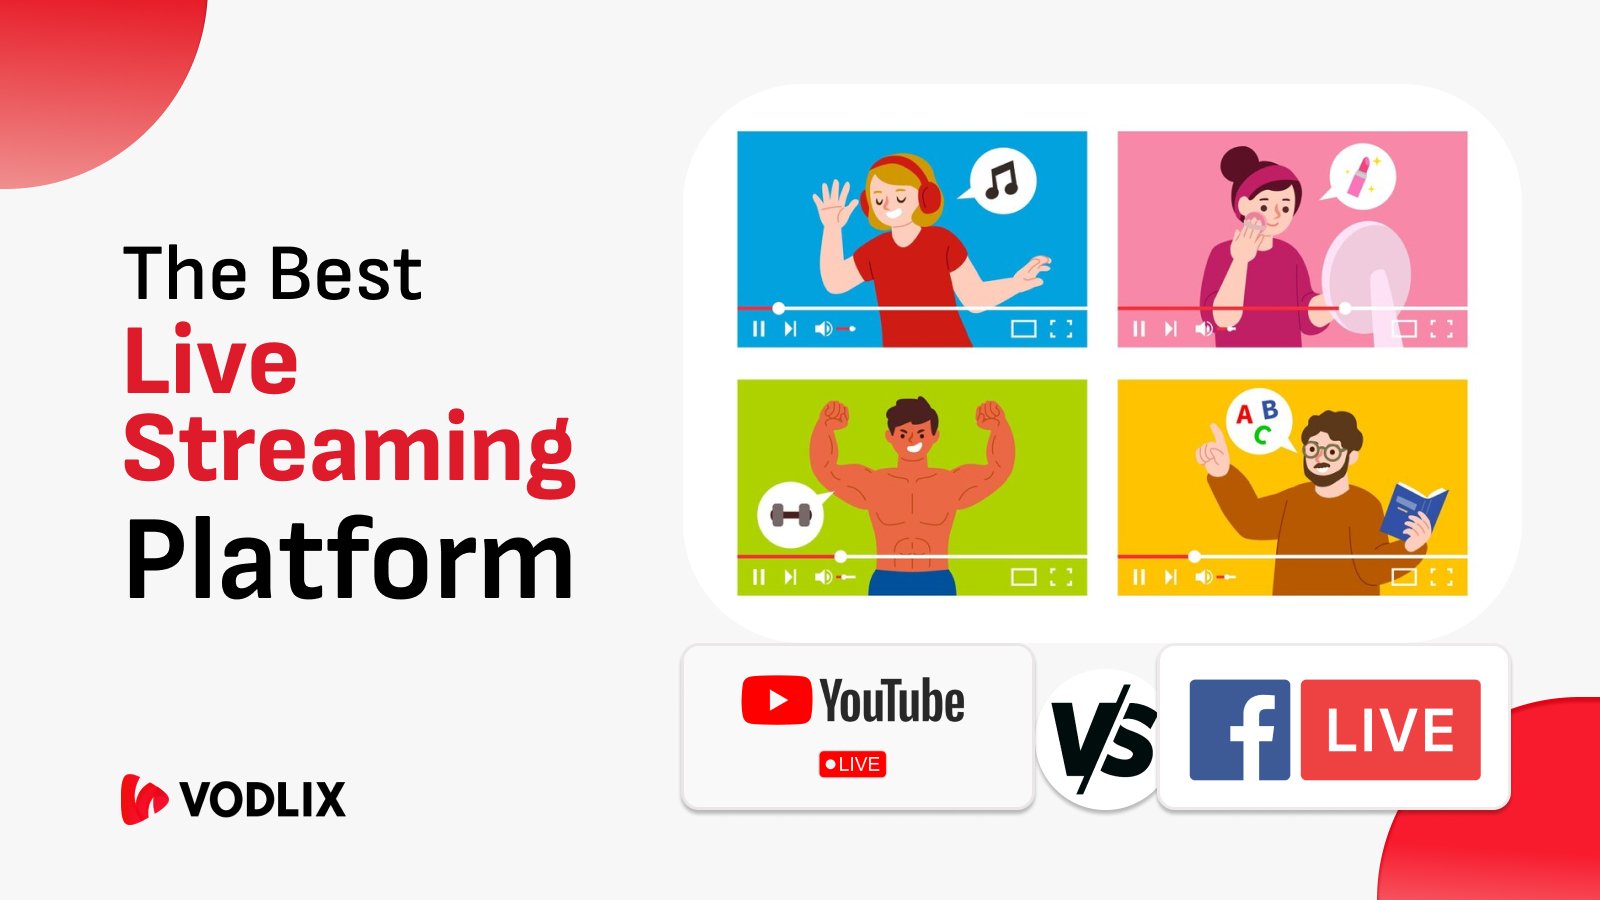 YouTube Live vs Facebook Live -The Best Live Streaming